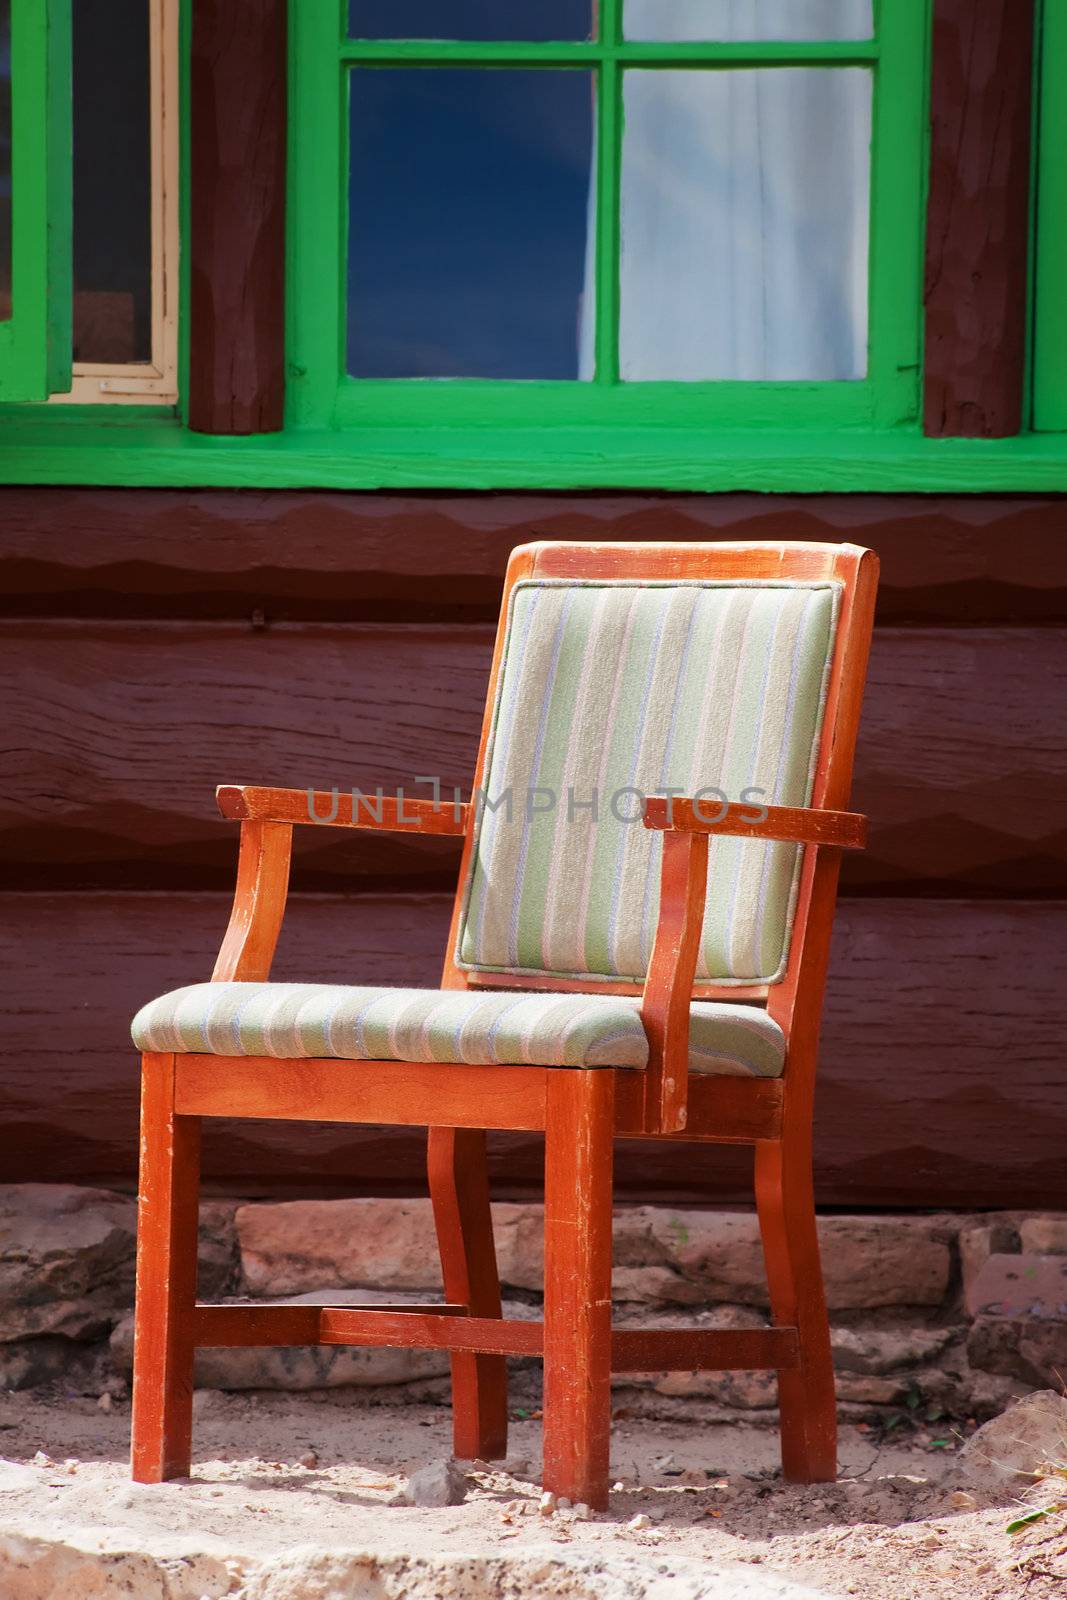 Rustic Chair by Creatista